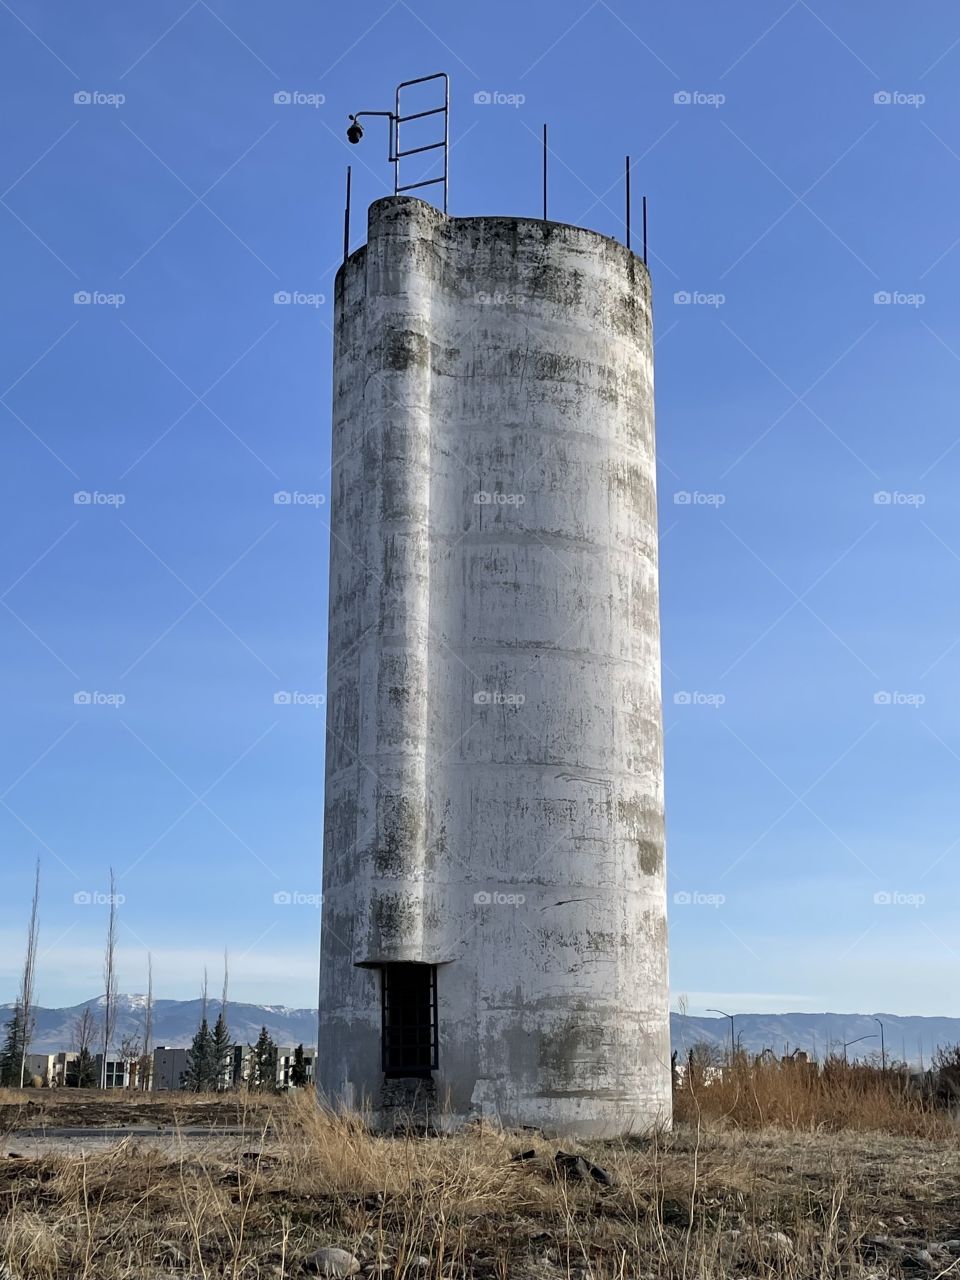 An old silo stands strong